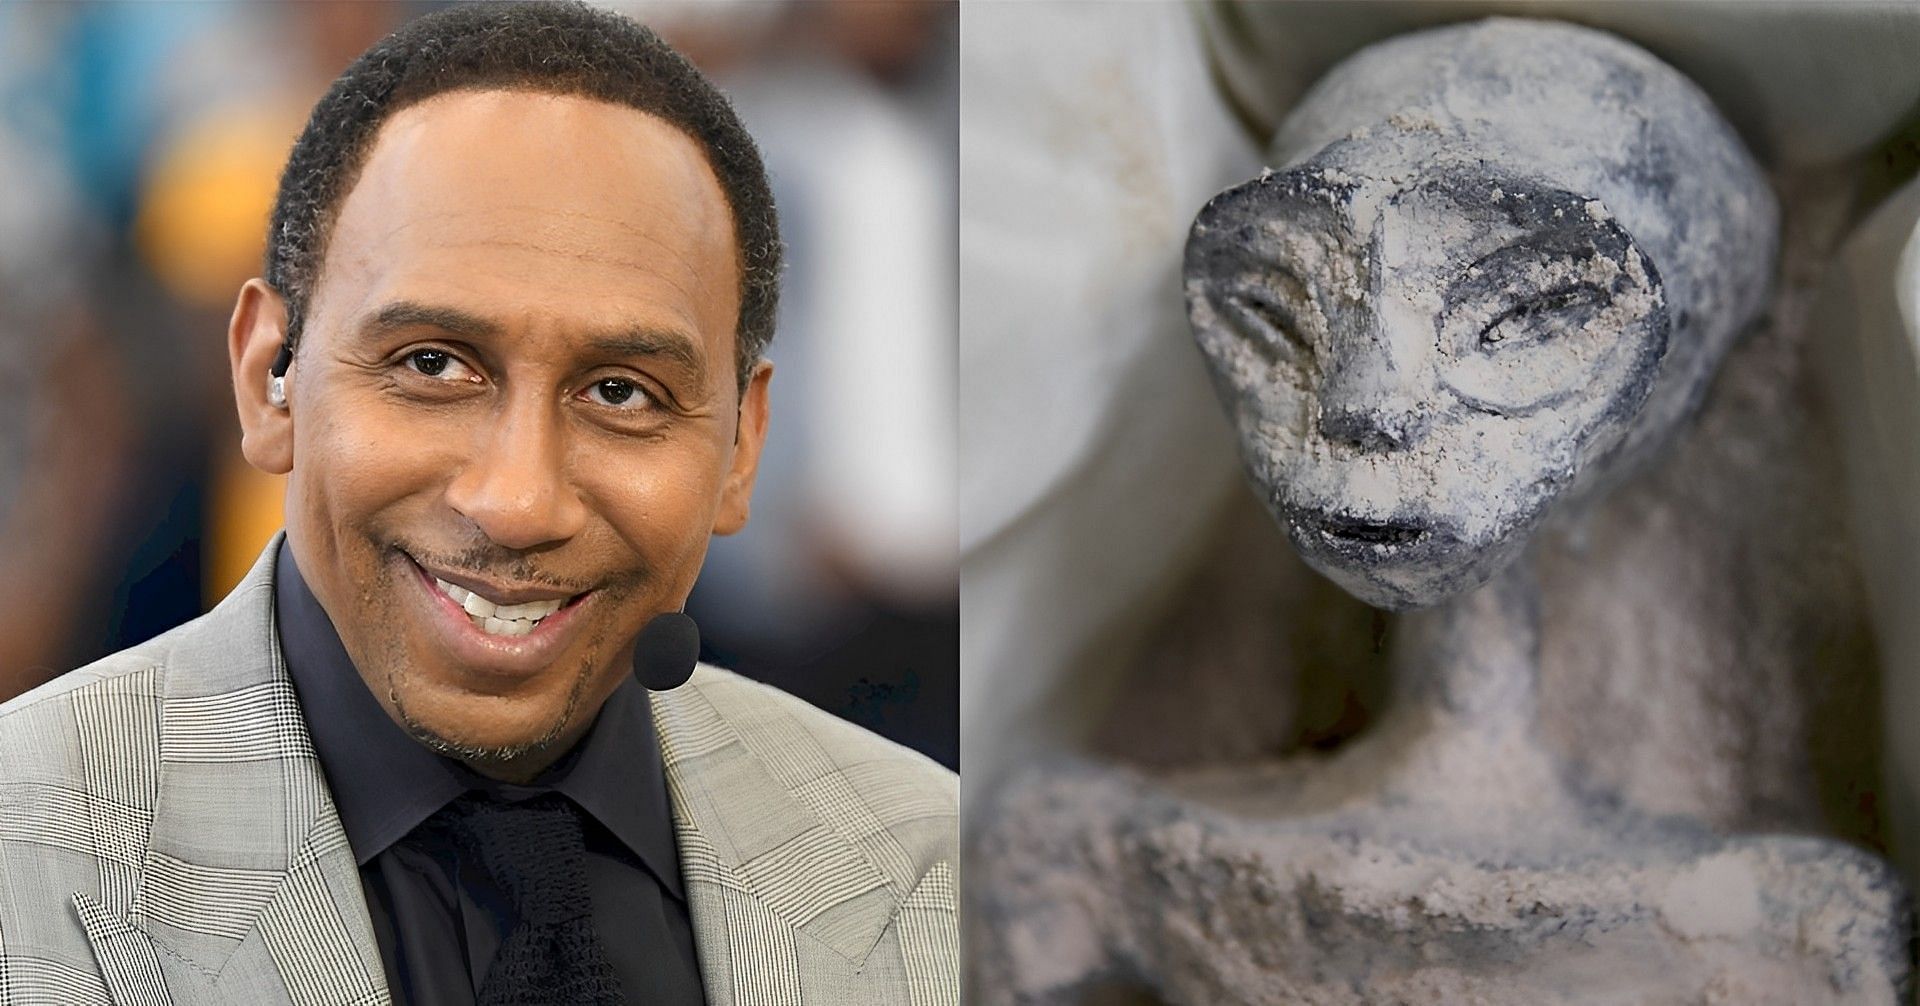 ESPN analyst Stephen A. Smith and alleged alien remains that were recently presented to the Mexican government